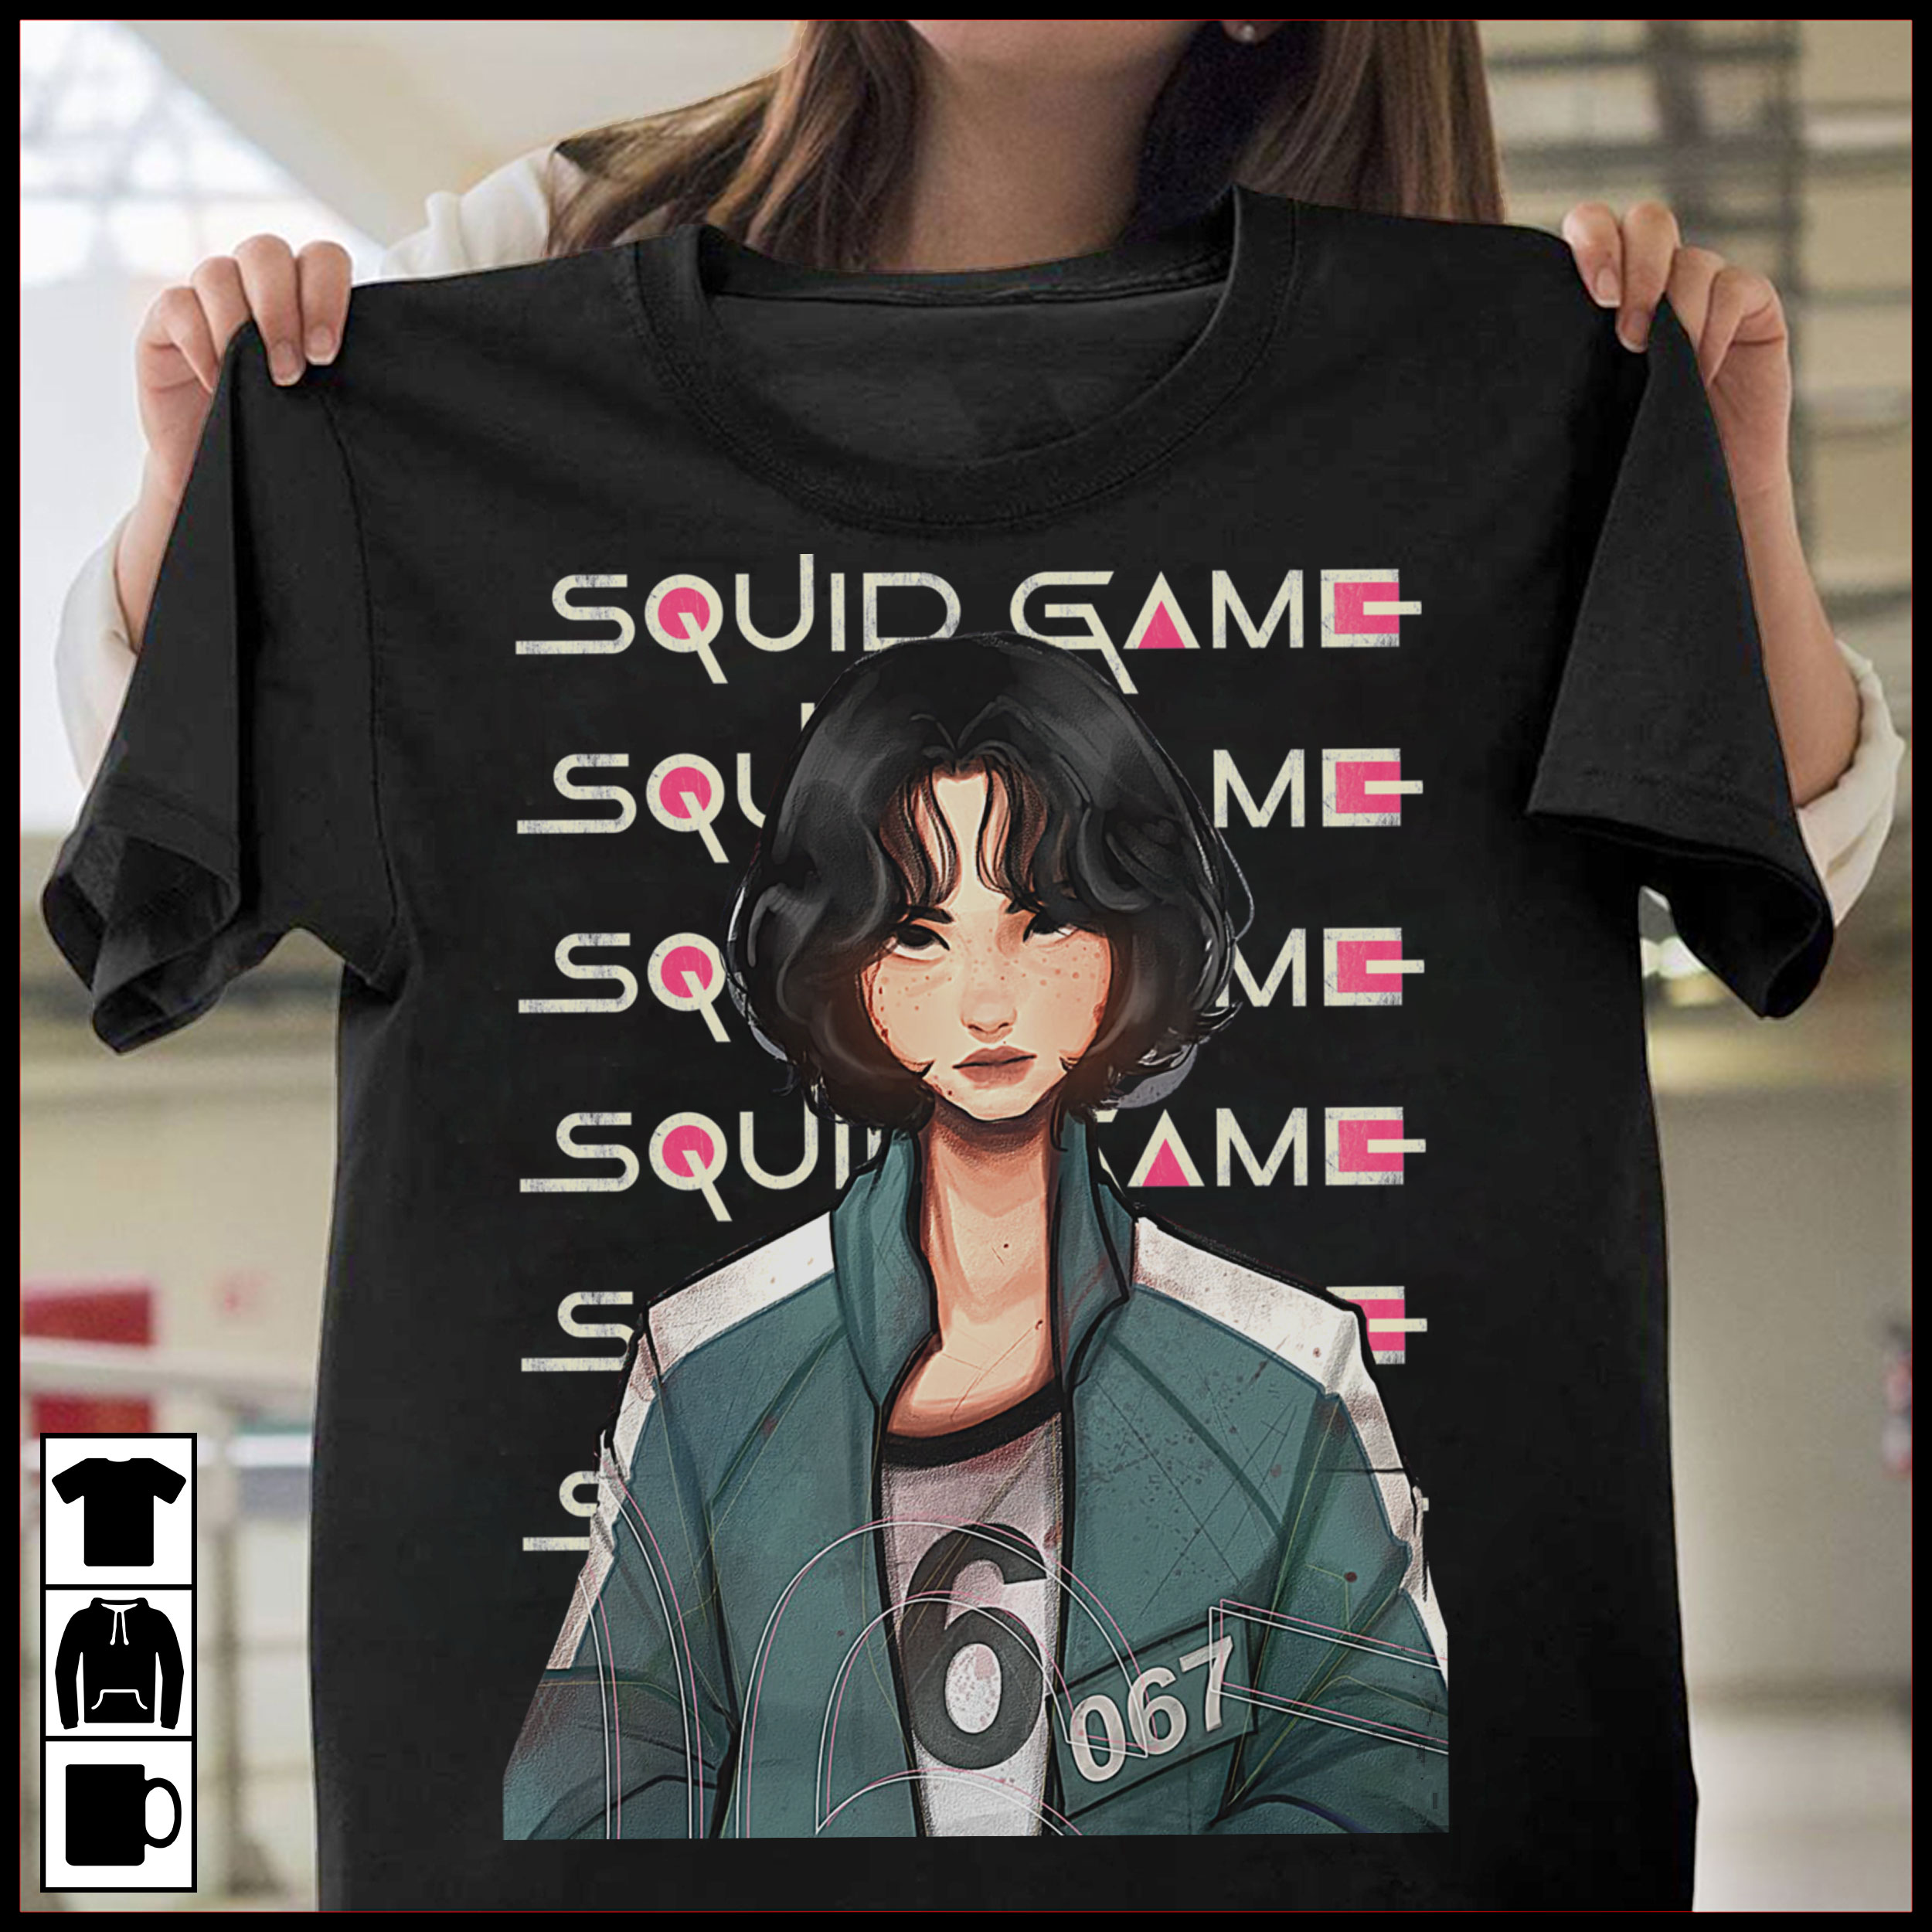 Squid game player